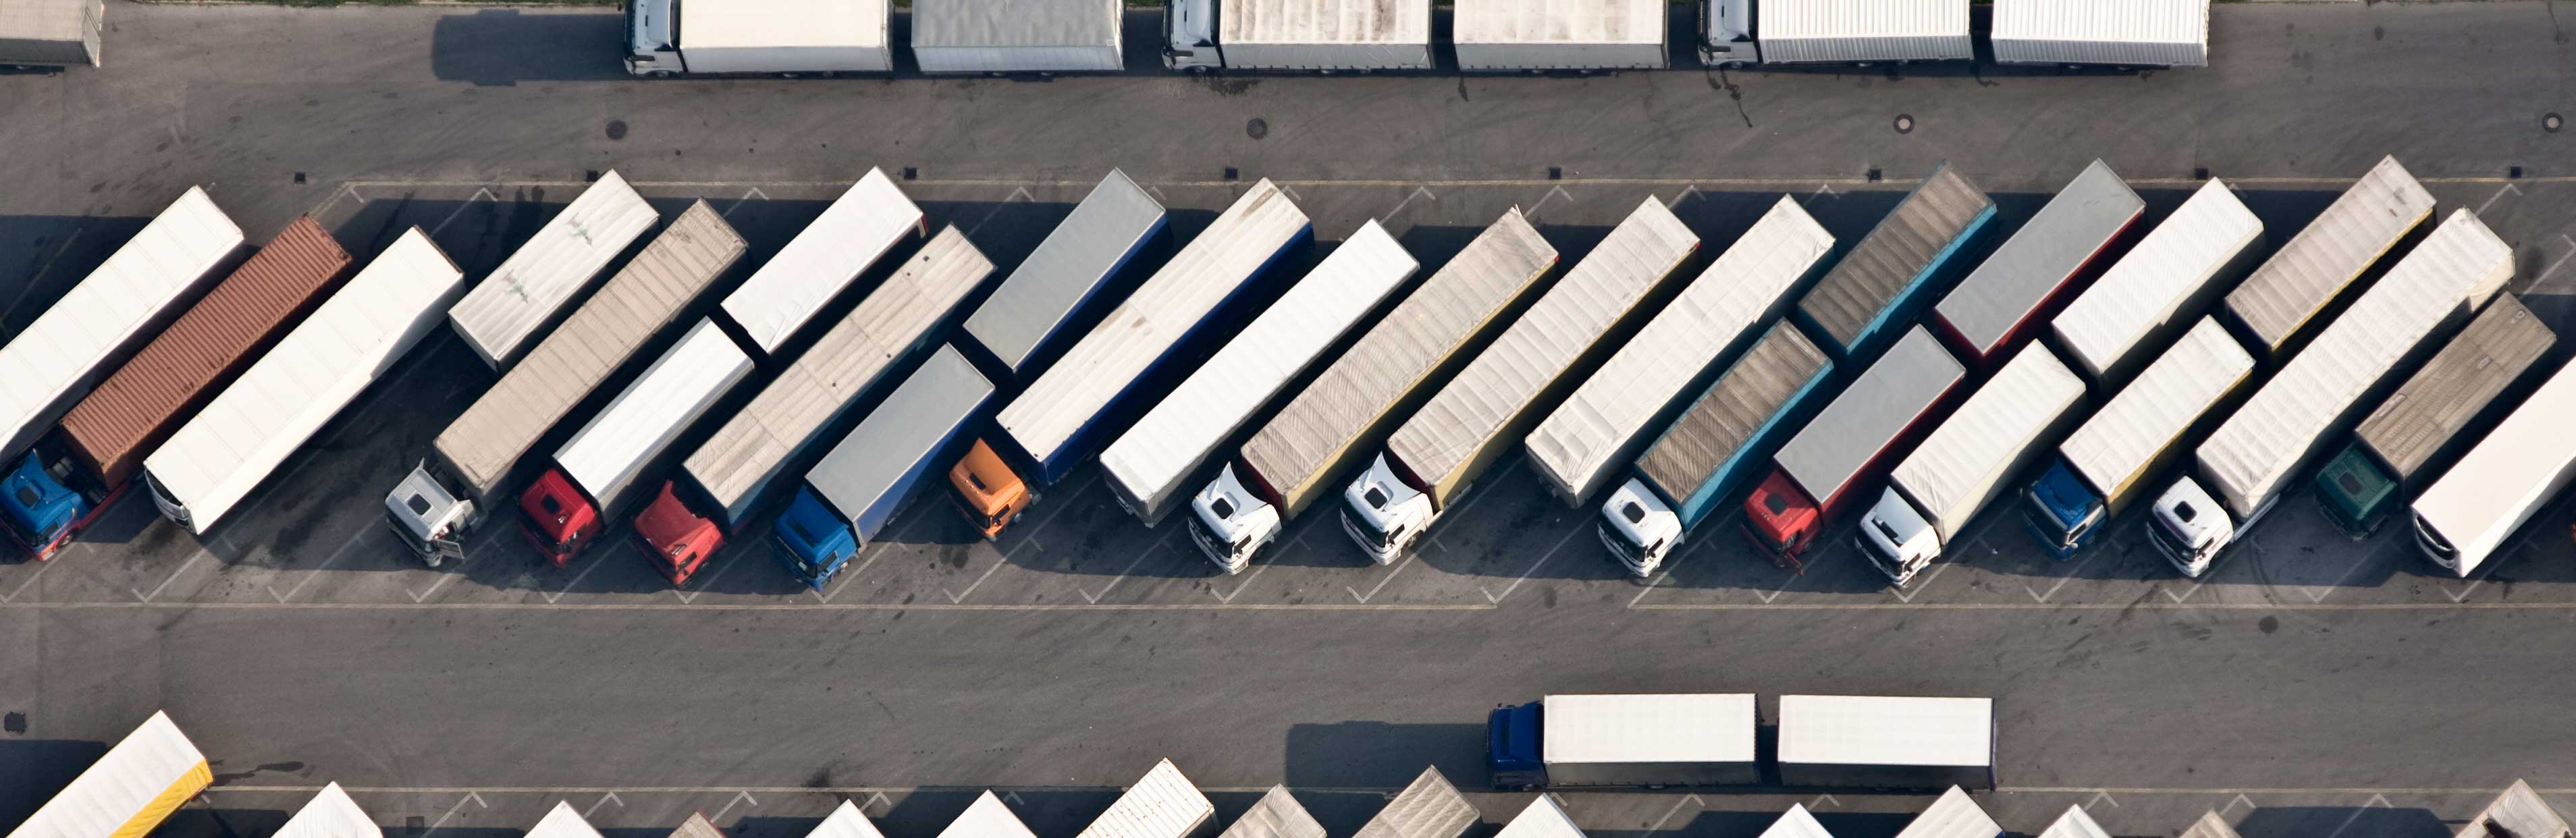 Lorry depot from above